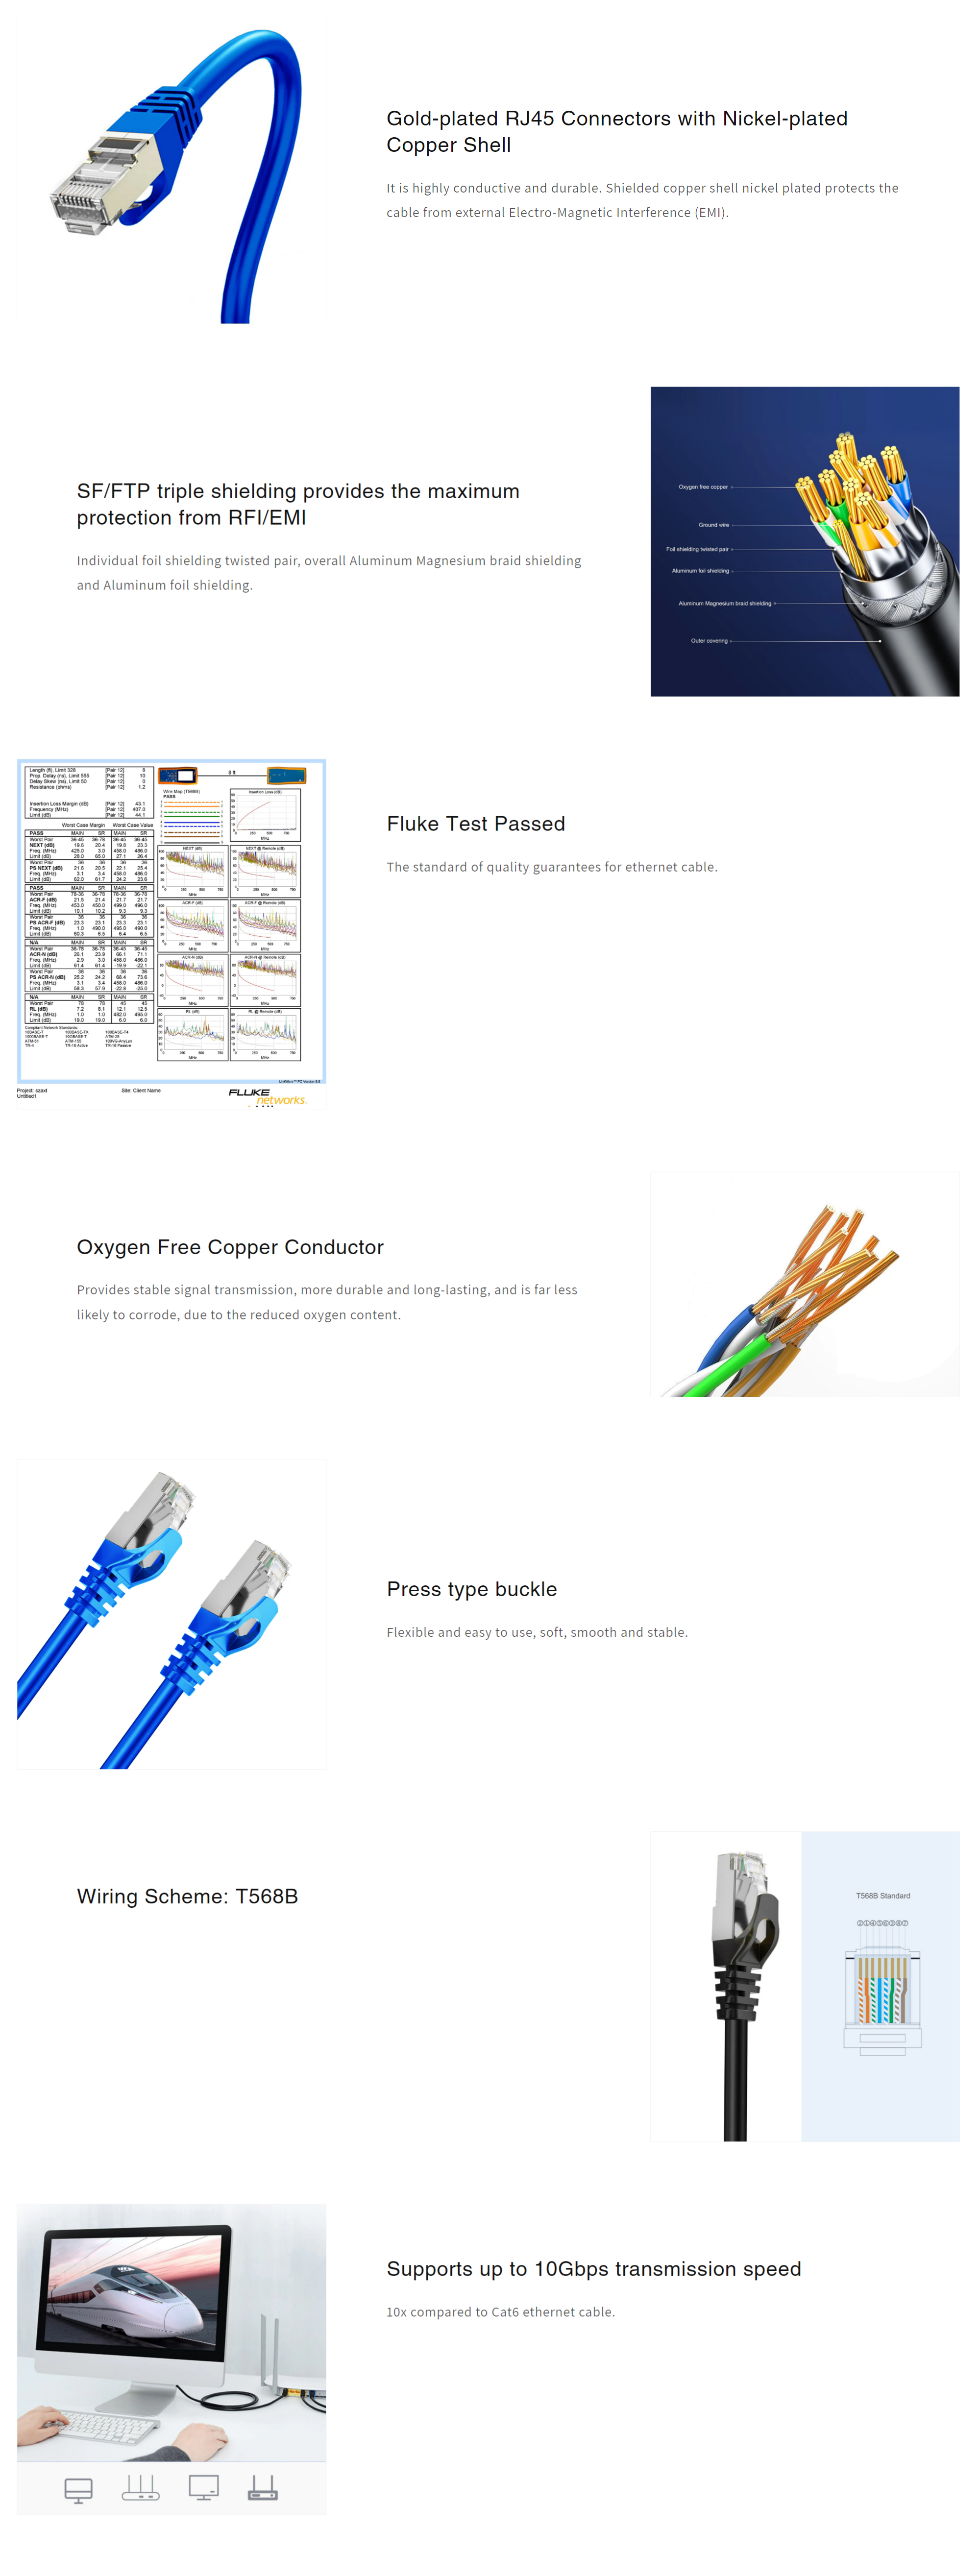 A large marketing image providing additional information about the product Cruxtec Cat7 30m 10GbE SF/FTP Triple Shielding Network Cable Blue - Additional alt info not provided